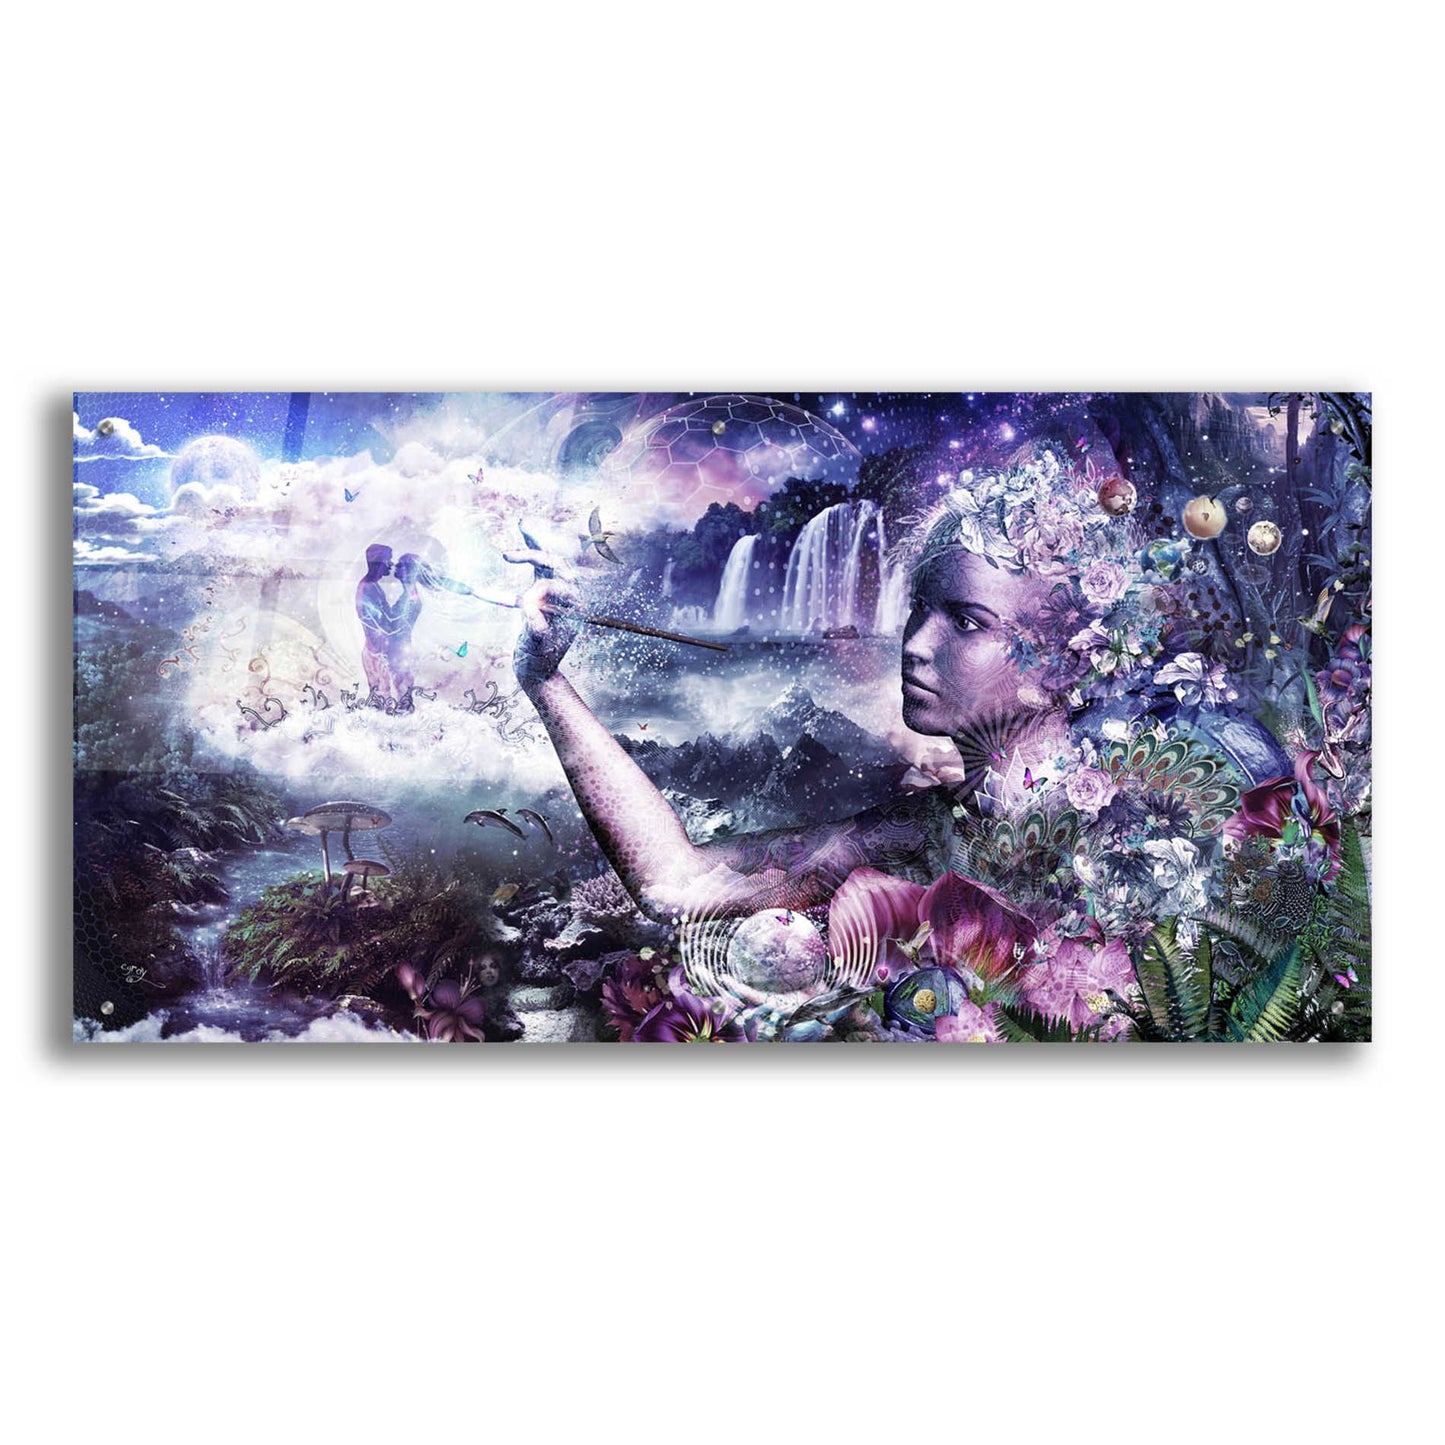 Epic Art 'The Painter' by Cameron Gray, Acrylic Glass Wall Art,48x24